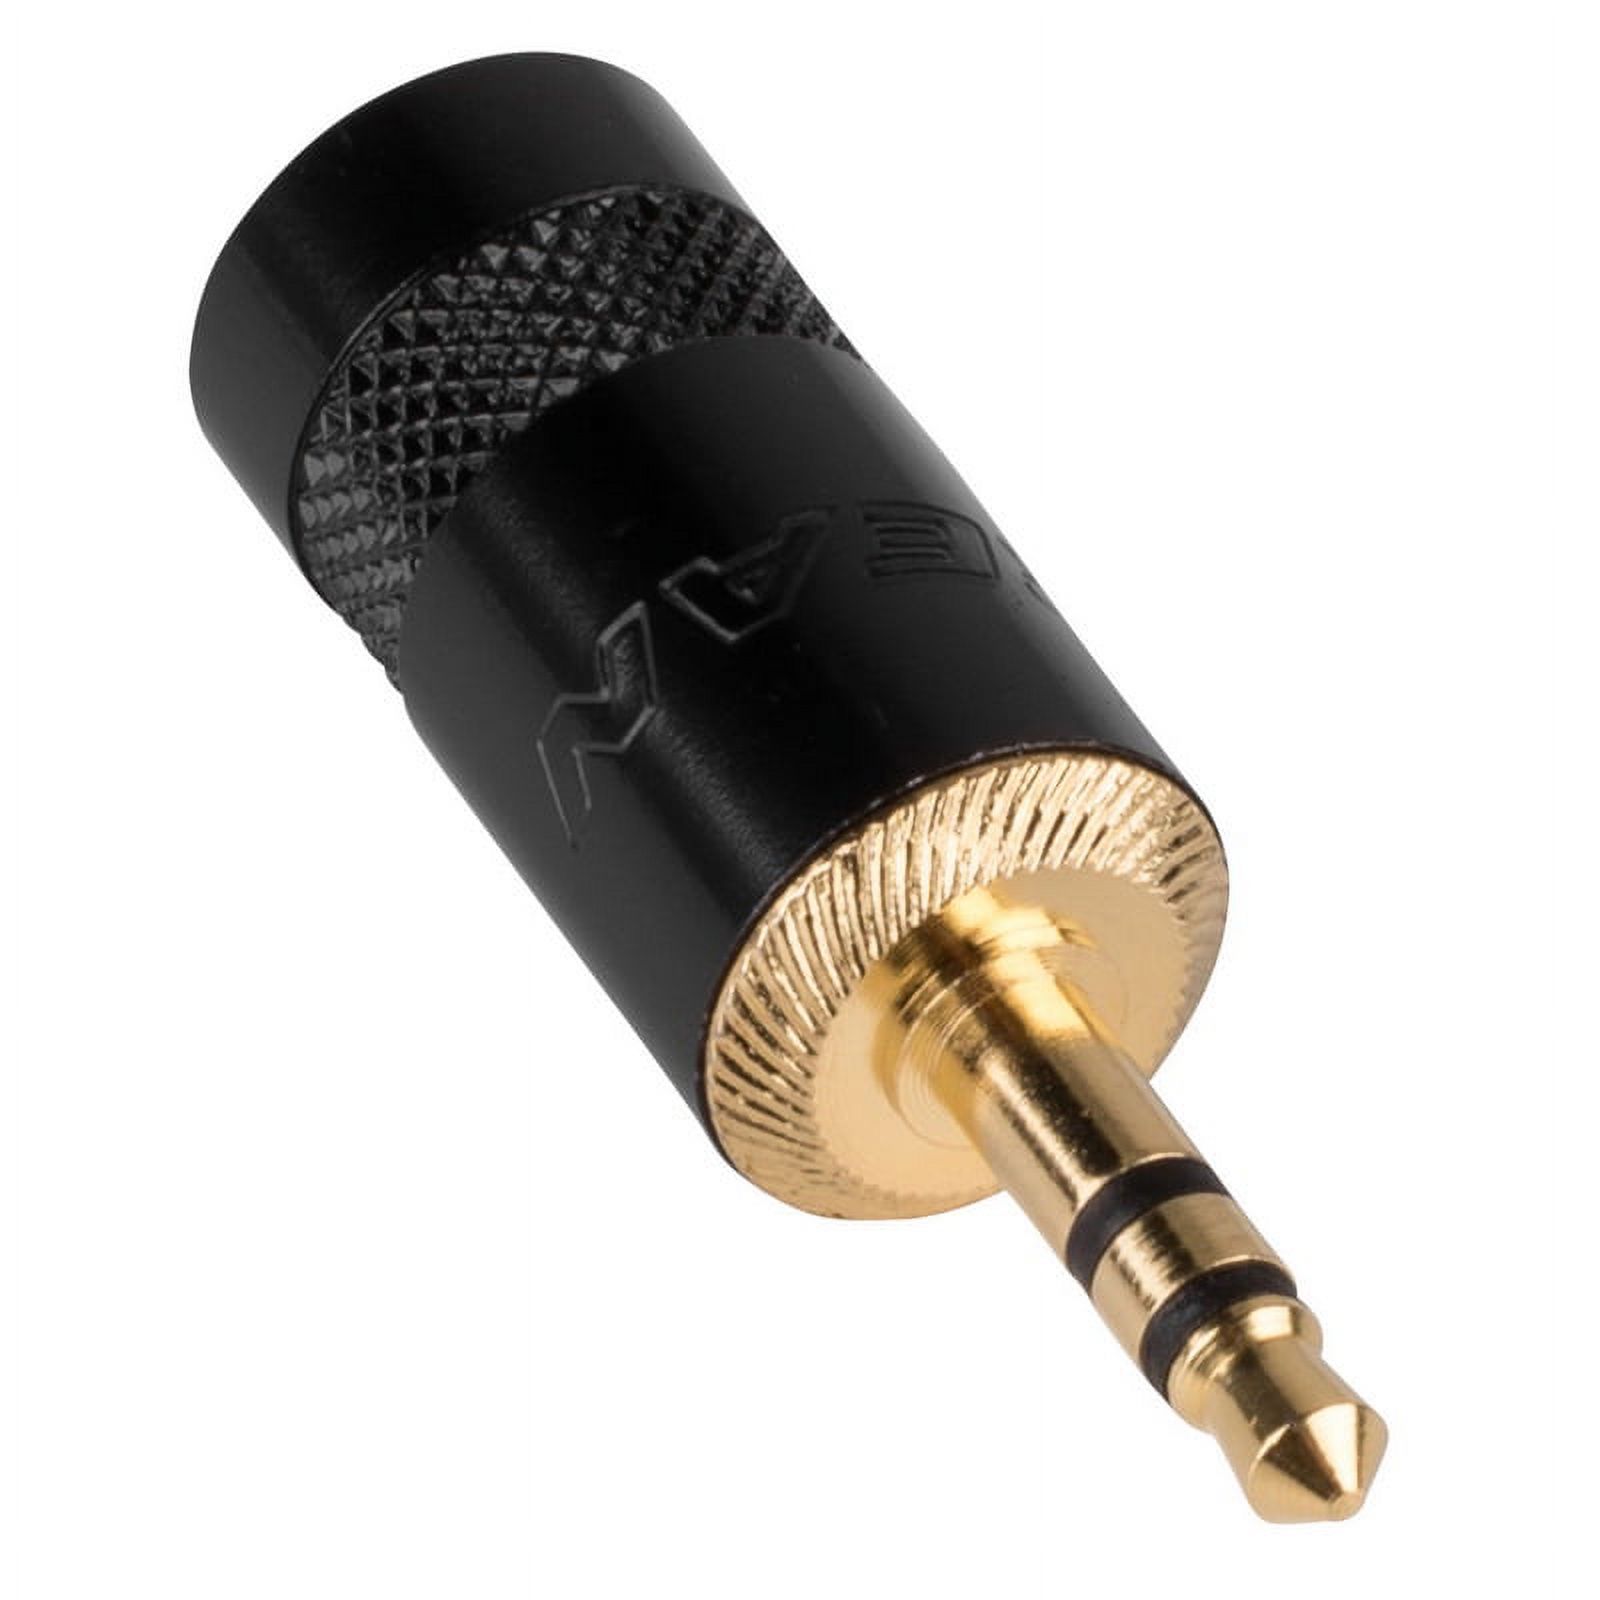 Neutrik Rean NYS231BG-LL 3.5mm Stereo Plug Connector Black with Gold Plug Large 8mm Cable Entry - image 1 of 4